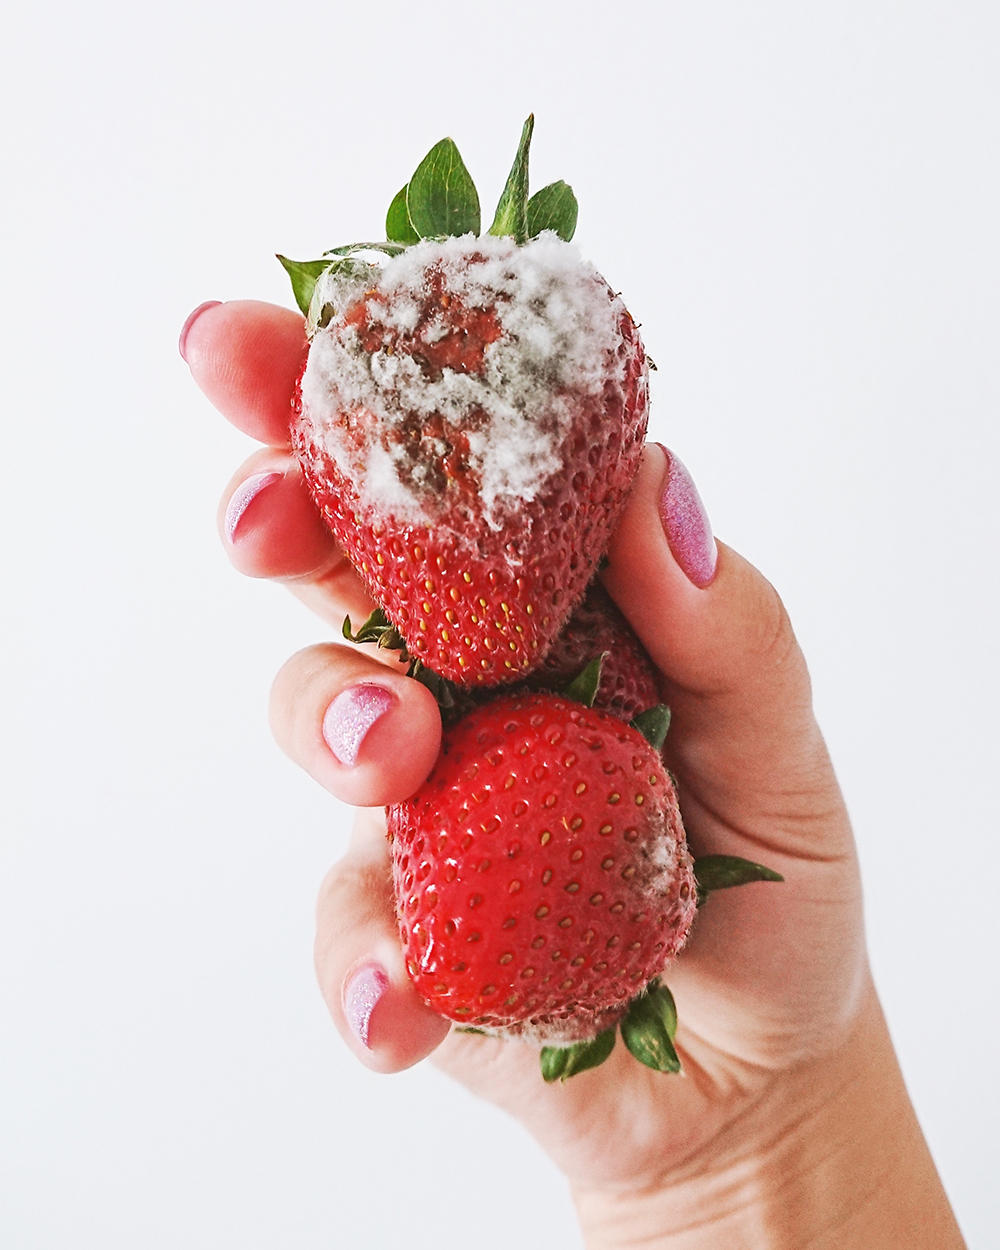 A hand with pink nail polish holding two large red strawberries, the top one mostly covered in fluffy white and grey mold on the front side.